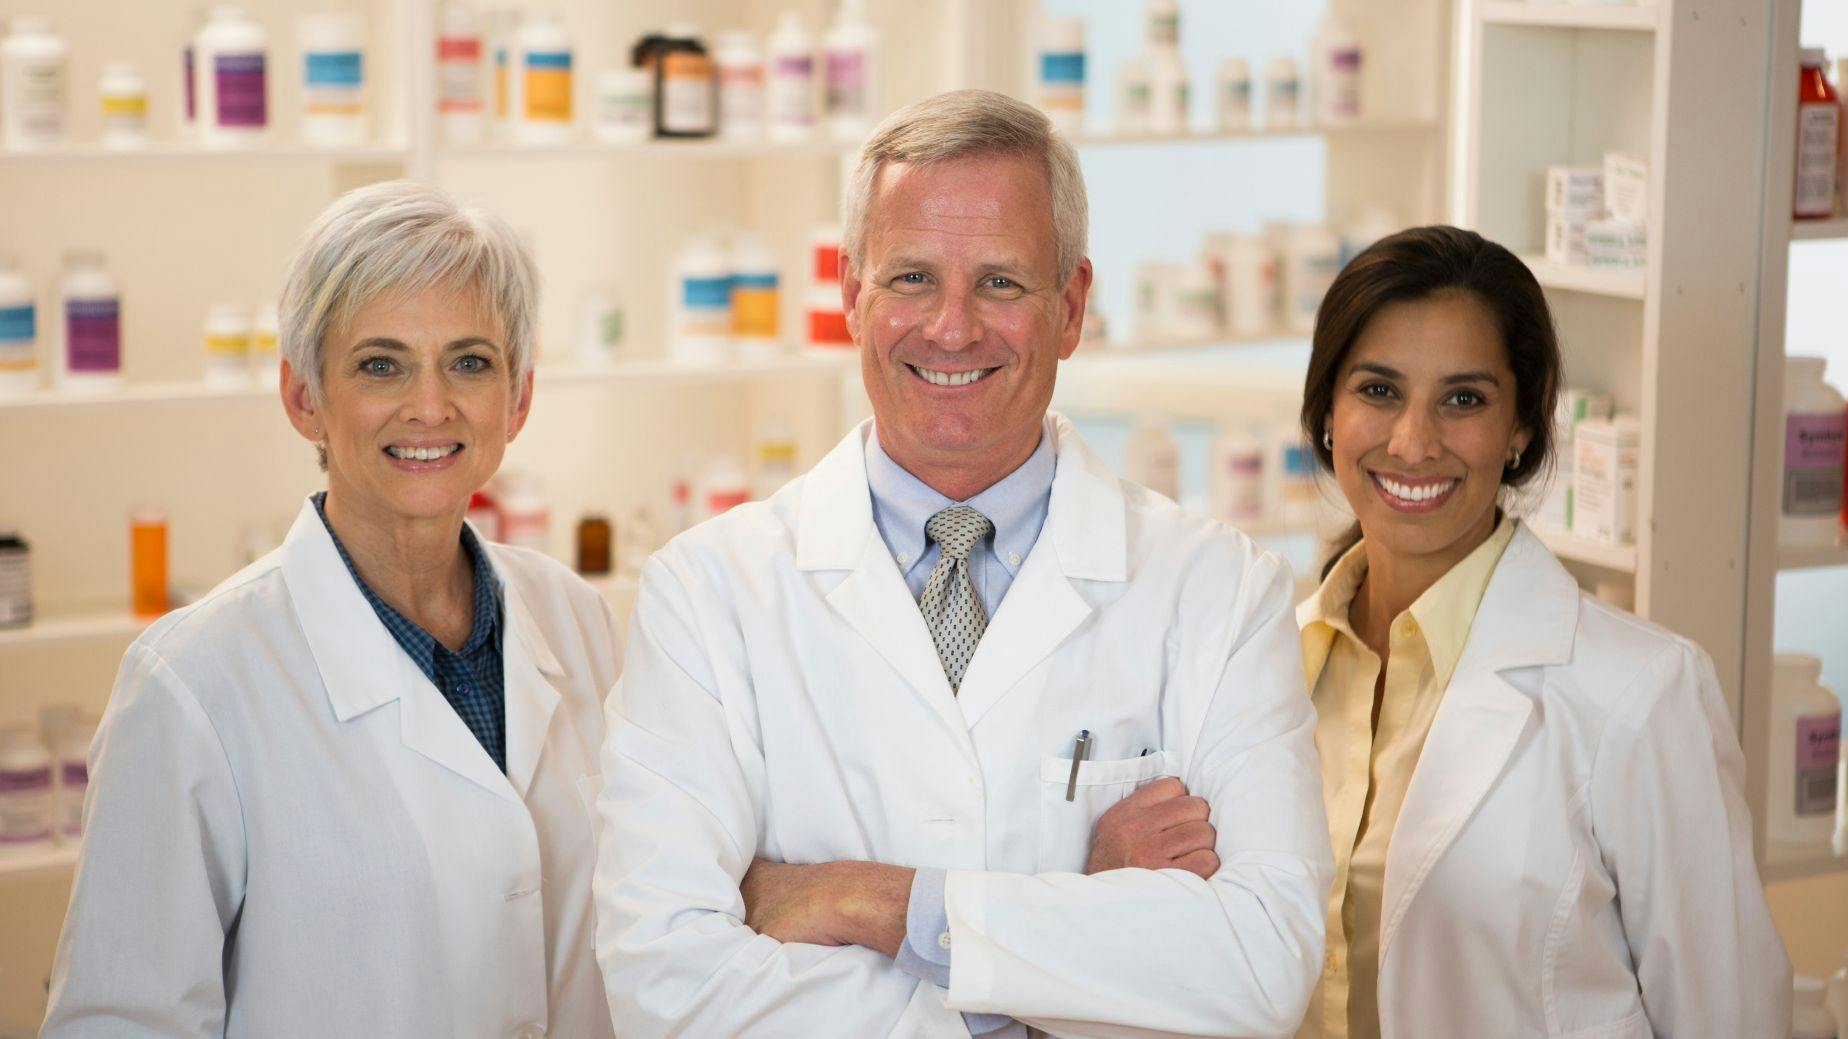 Cultural Competence Sets Pharmacy Professionals Apart